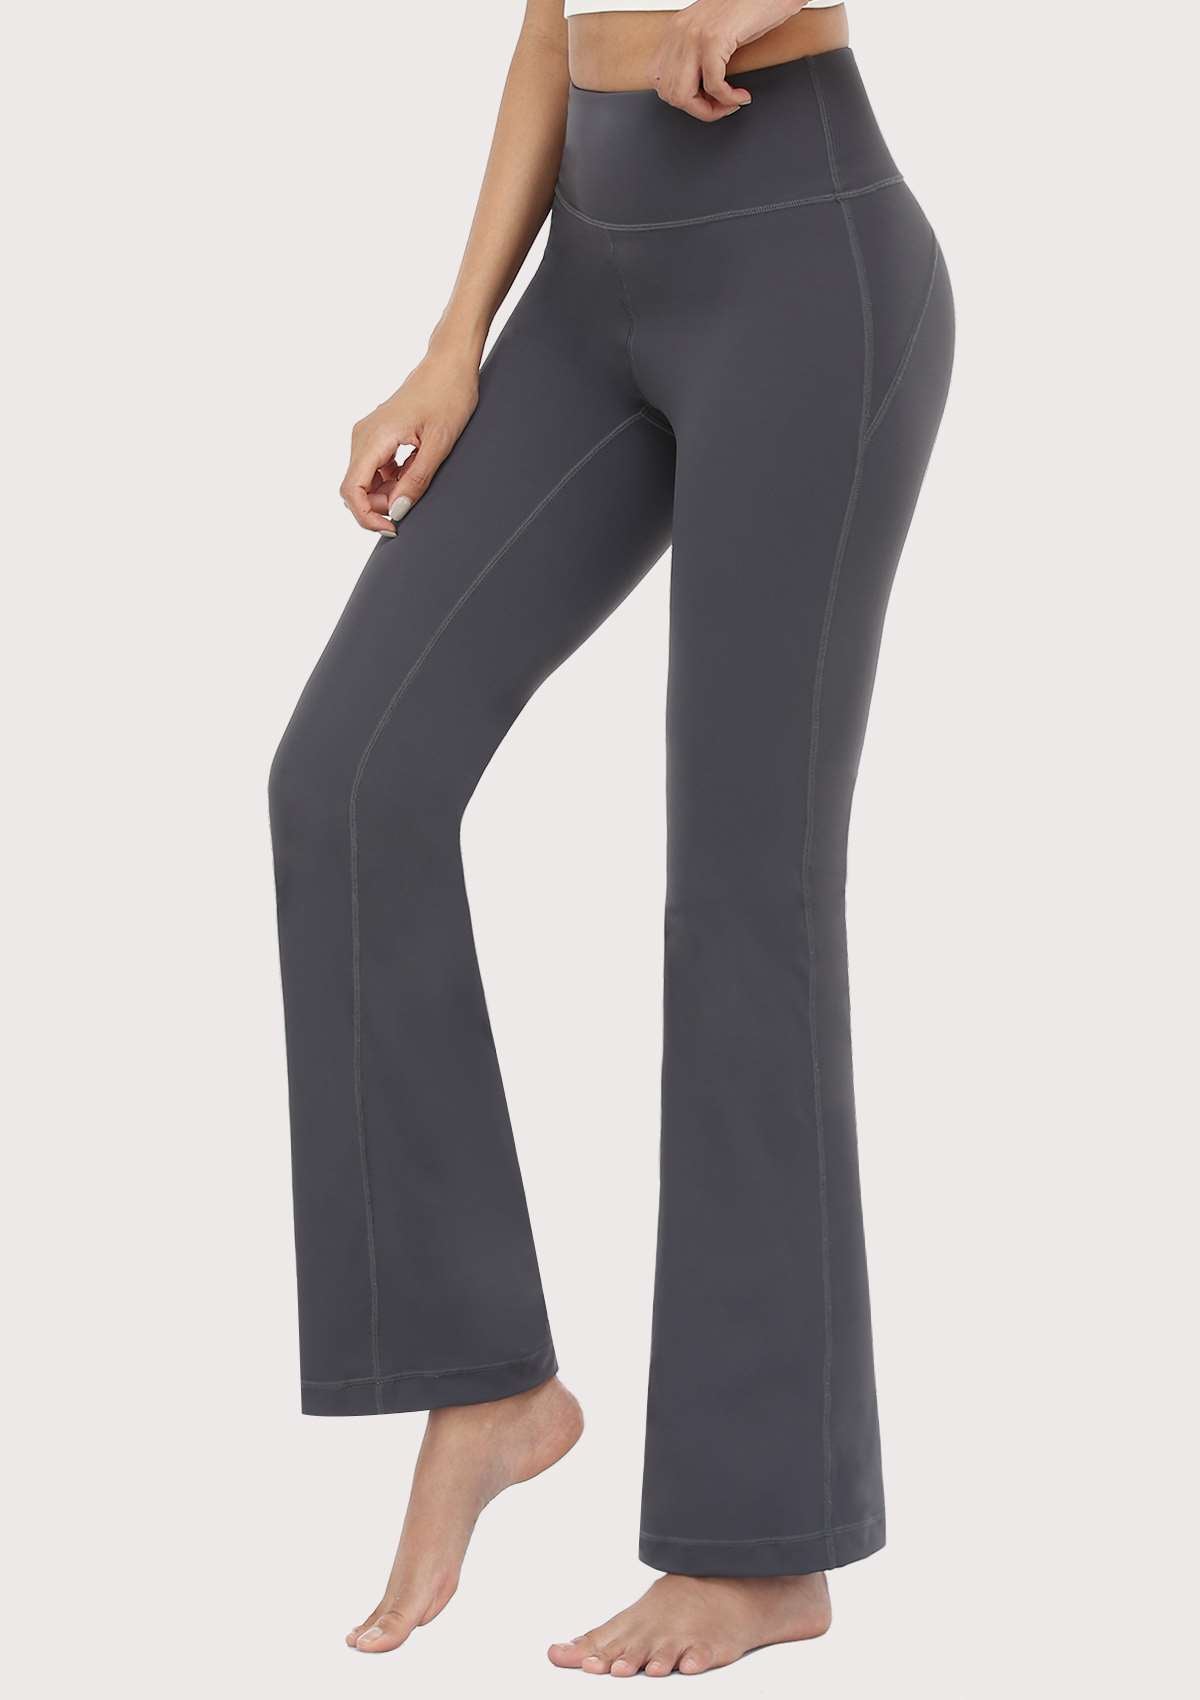 SONGFUL Smooth High Waisted Bootcut Yoga Sports Pants - XL / Dark Grey